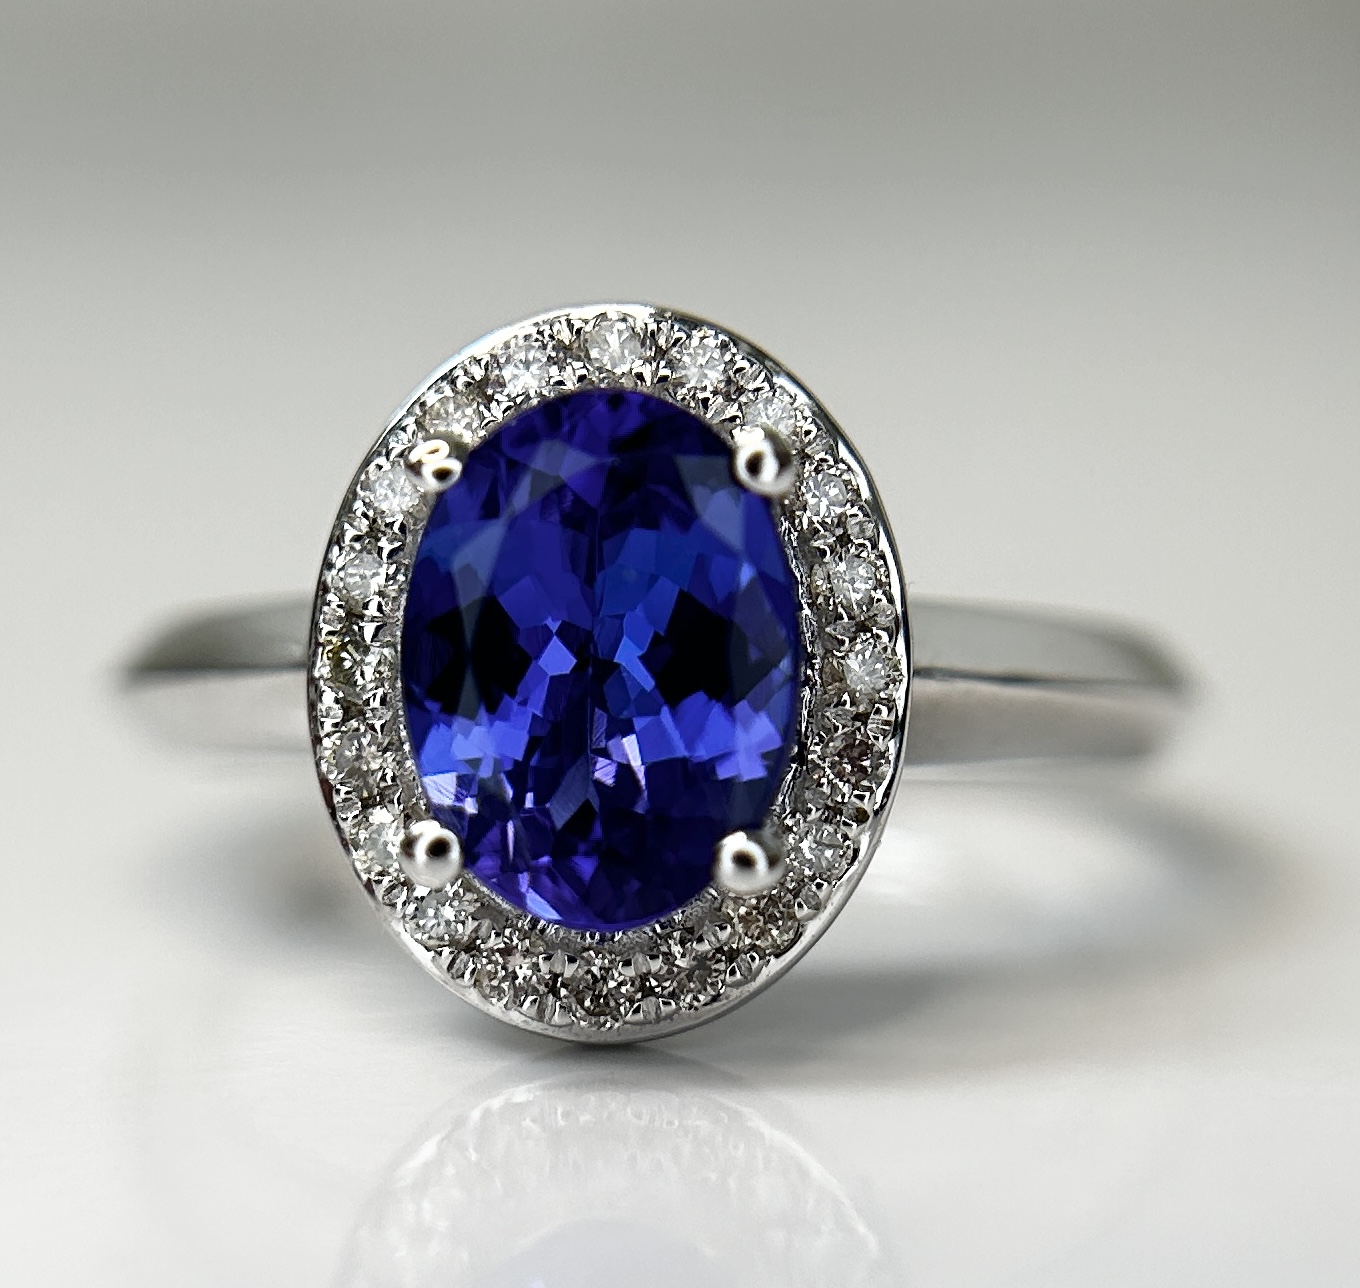 Beautiful Natural Tanzanite Ring With Diamonds and 18k Gold - Image 6 of 9